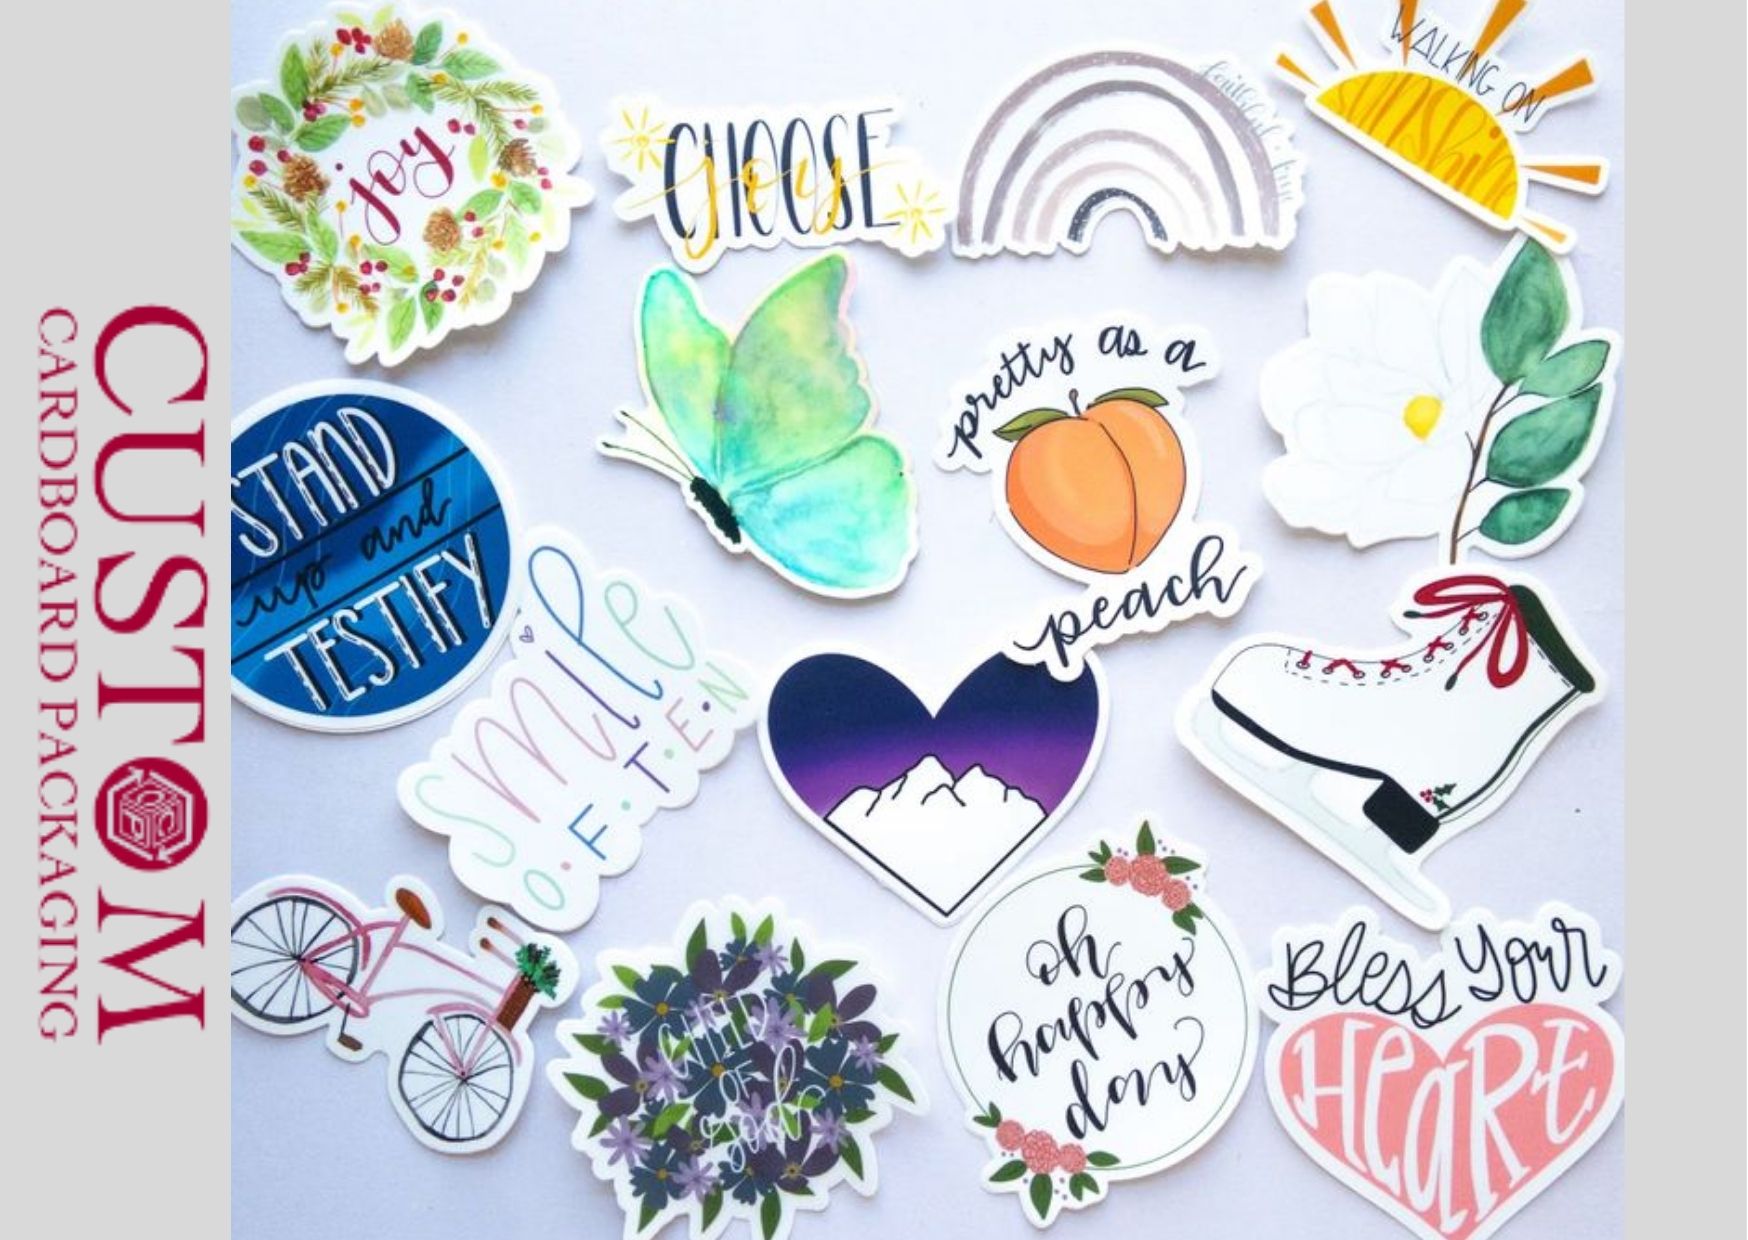 Work smartly and artistically to create miraculous custom stickers